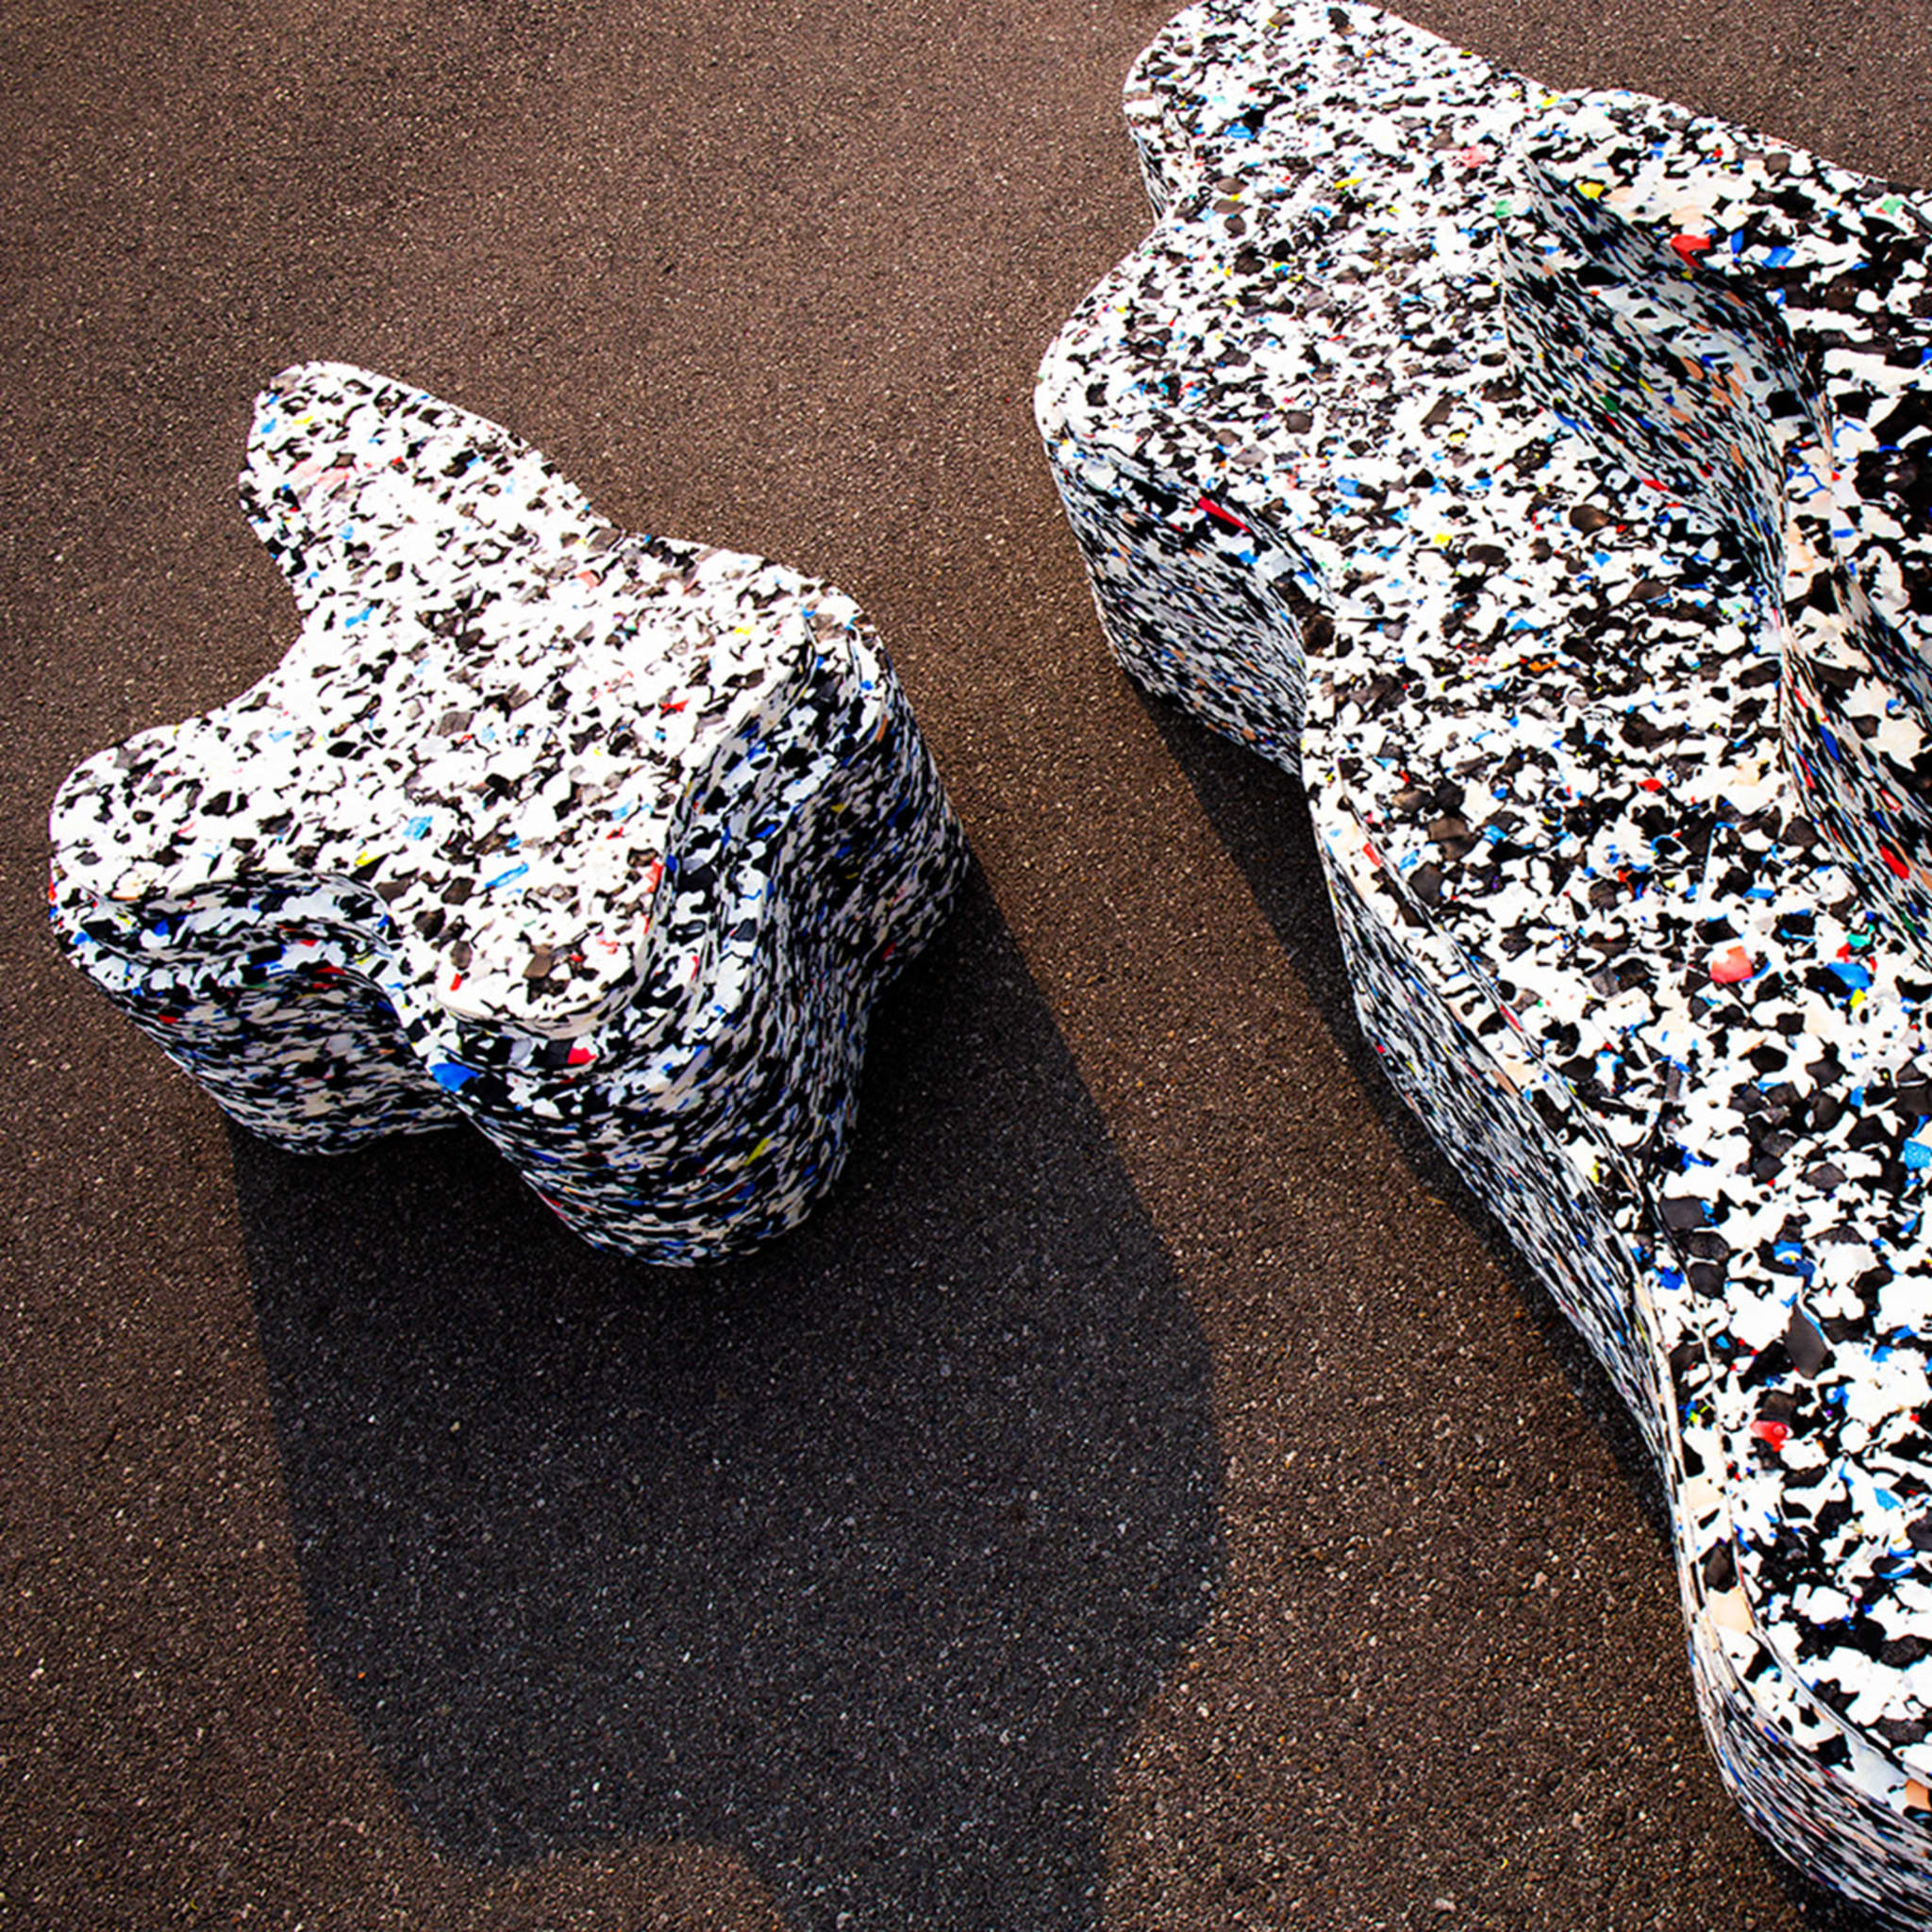 Non-Stop Materia Recycled Island Sofa By Clemence Seilles - Alternative view 2